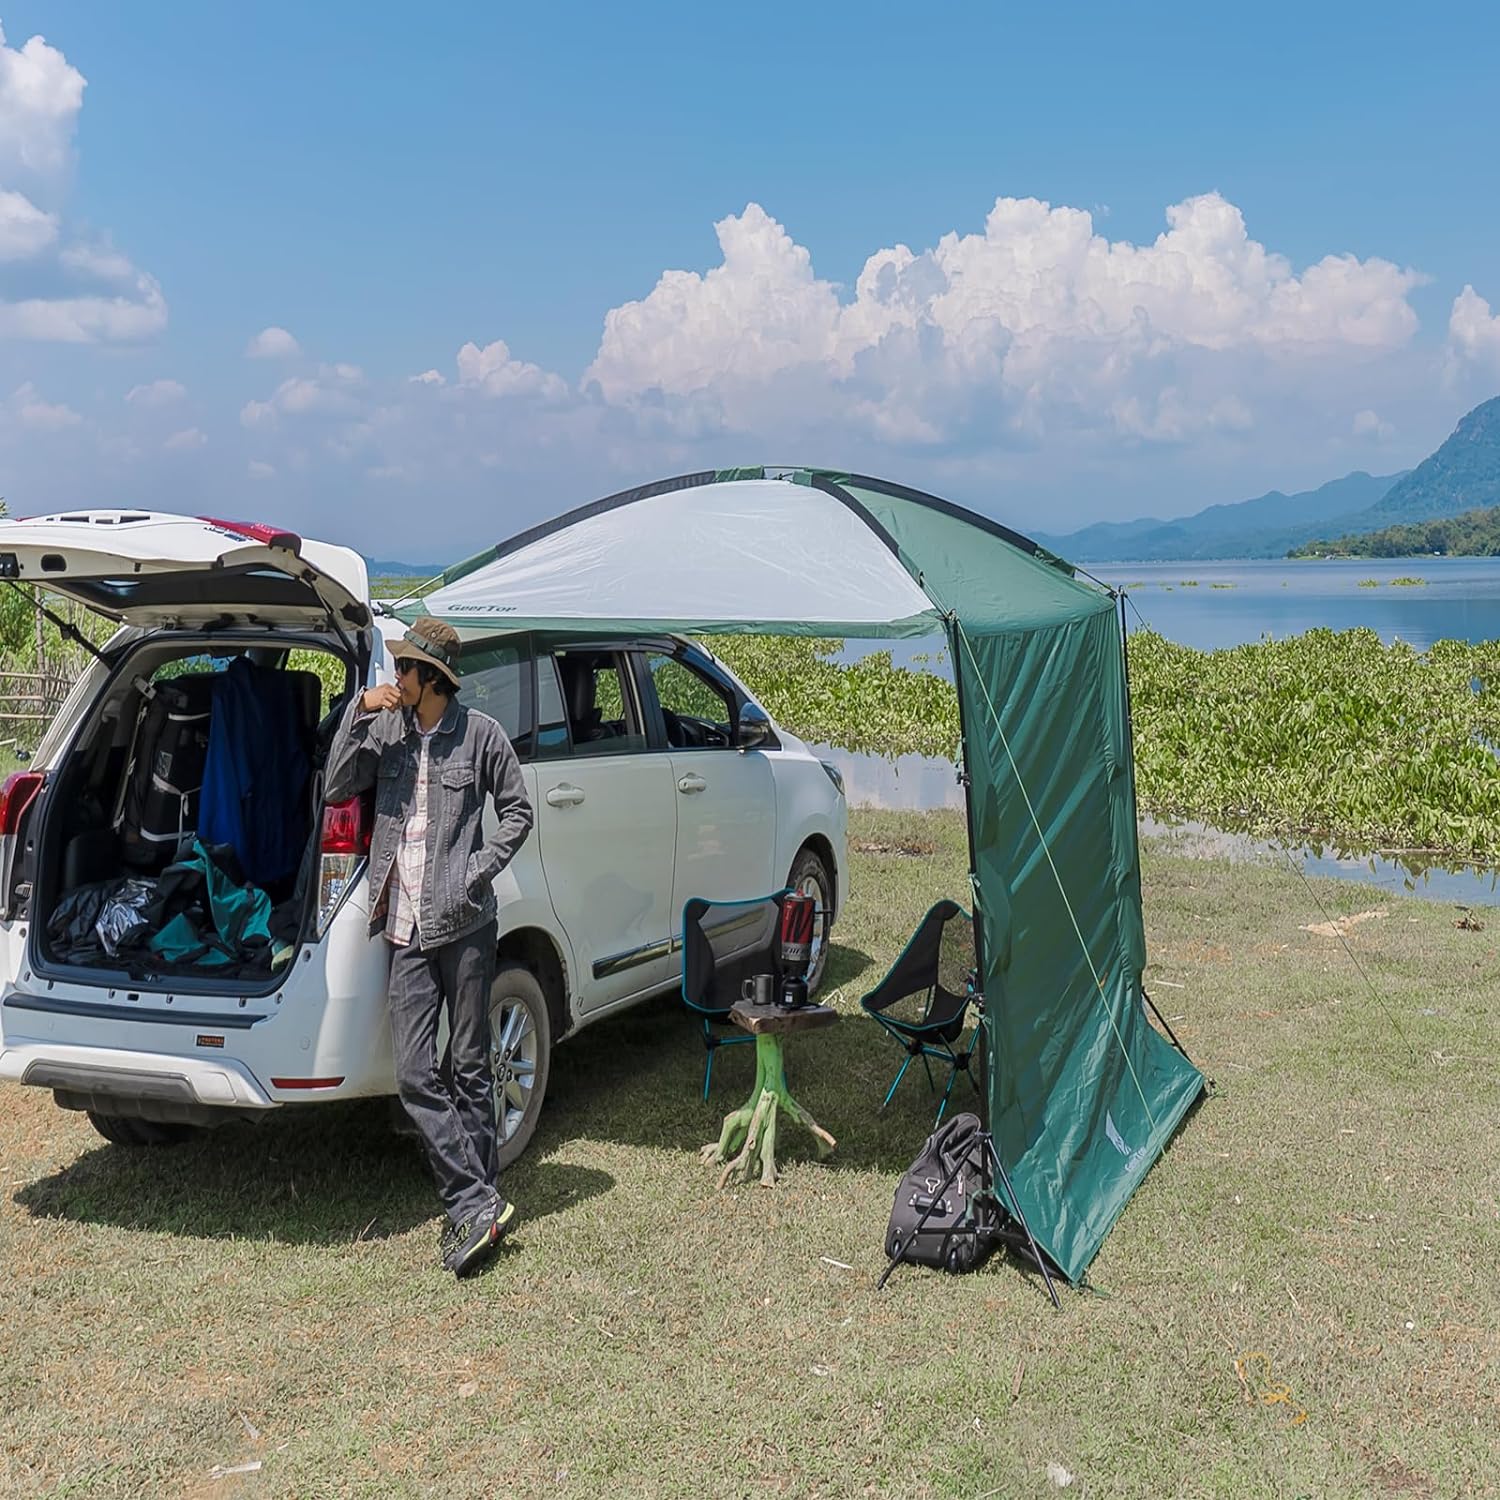 GeerTop Awning Canopy For Family Car Camping